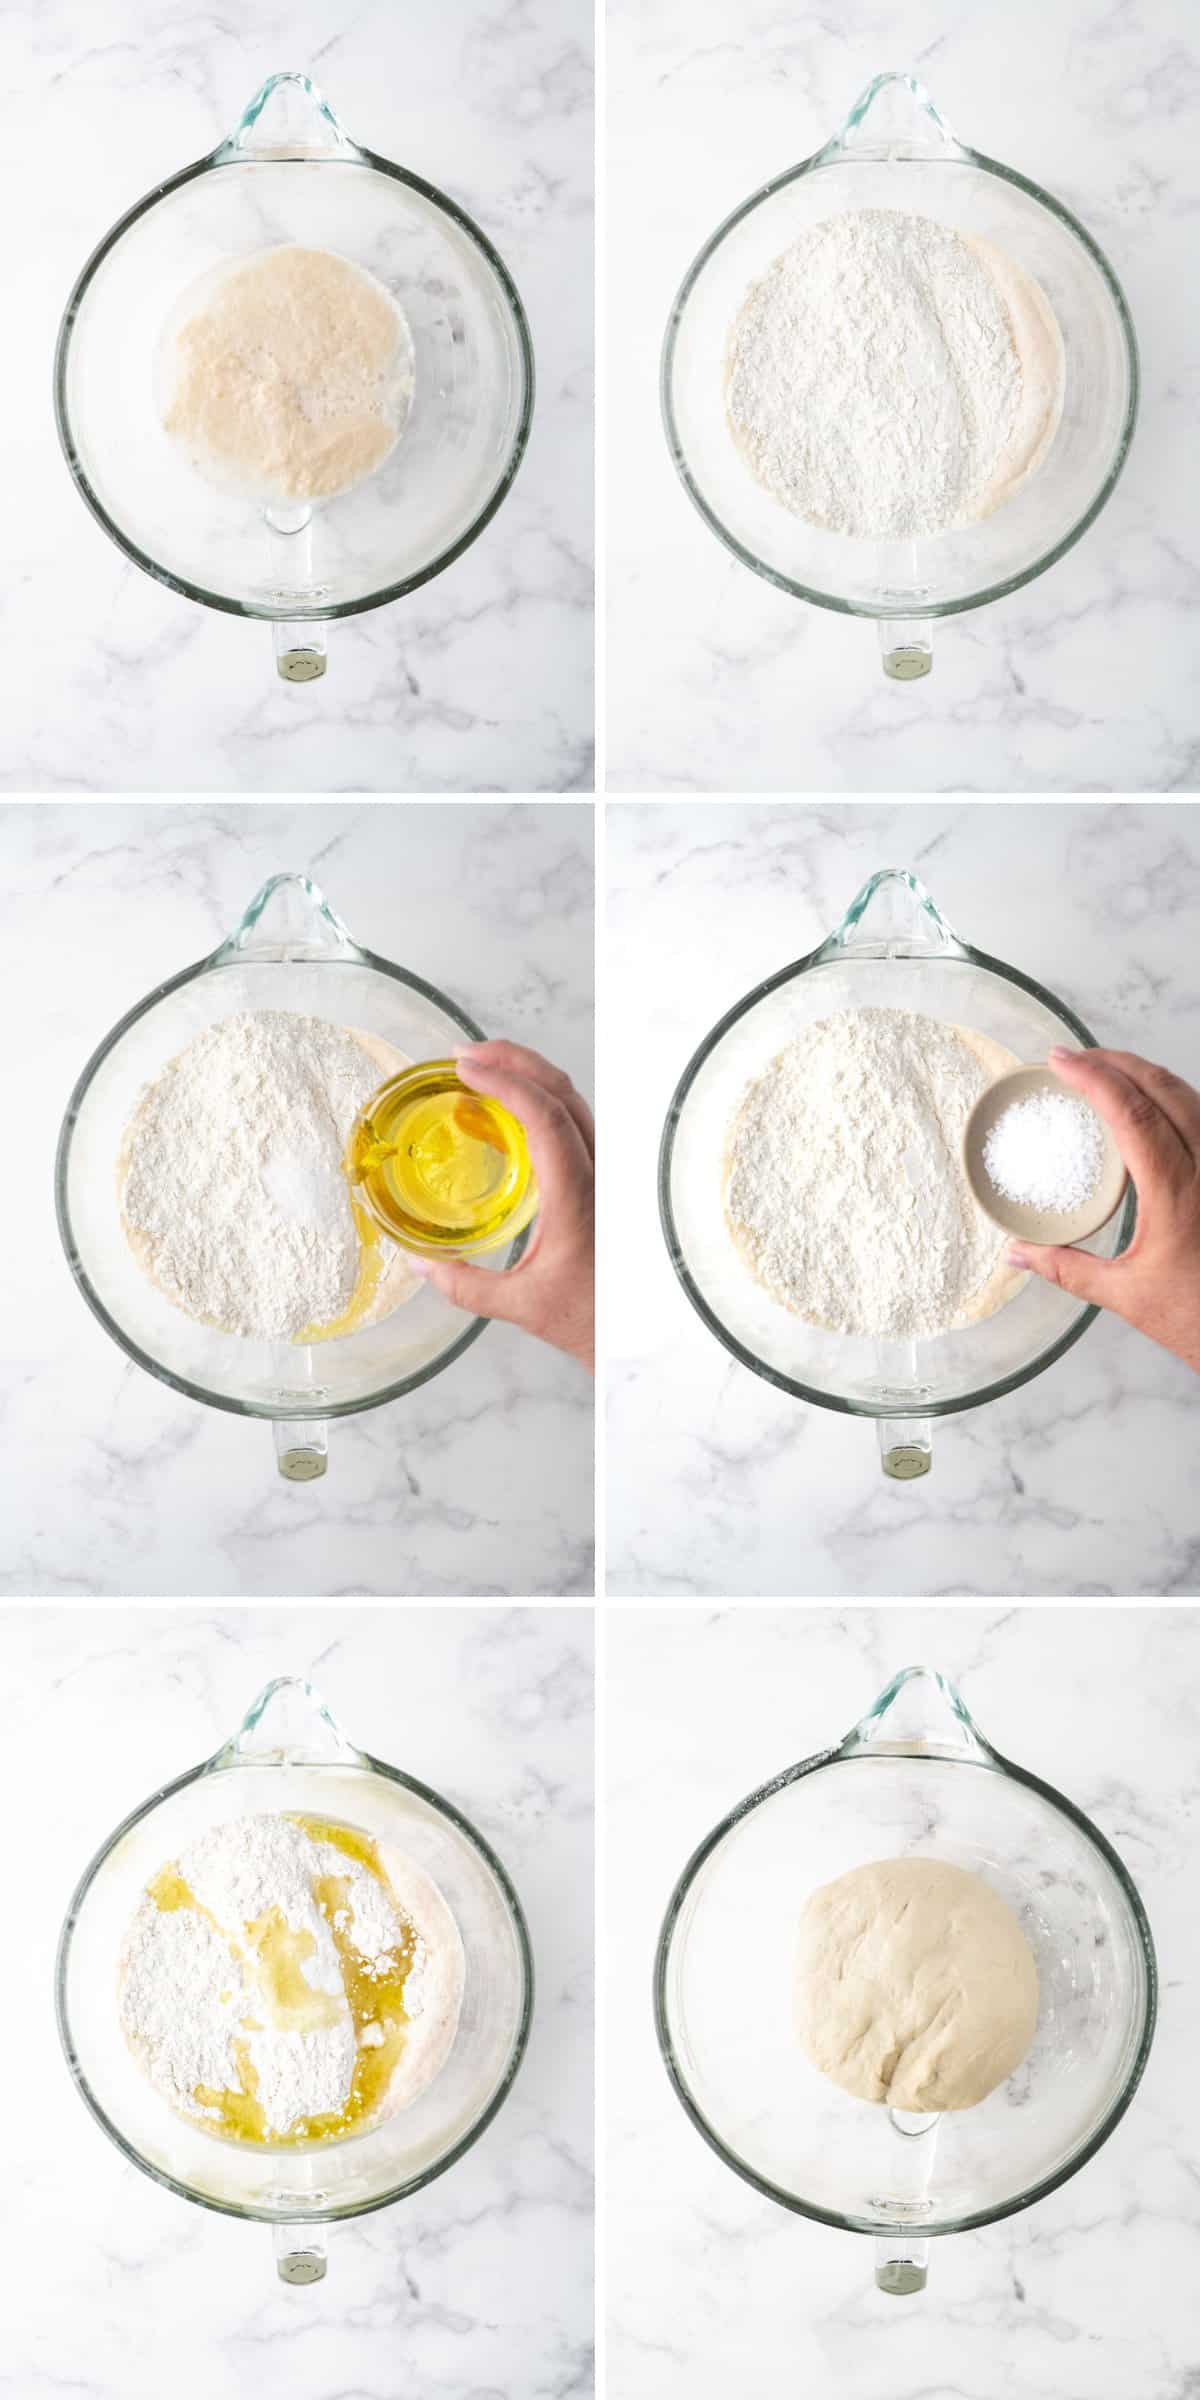 A collage image showing step-by-step images to mix pizza dough together.